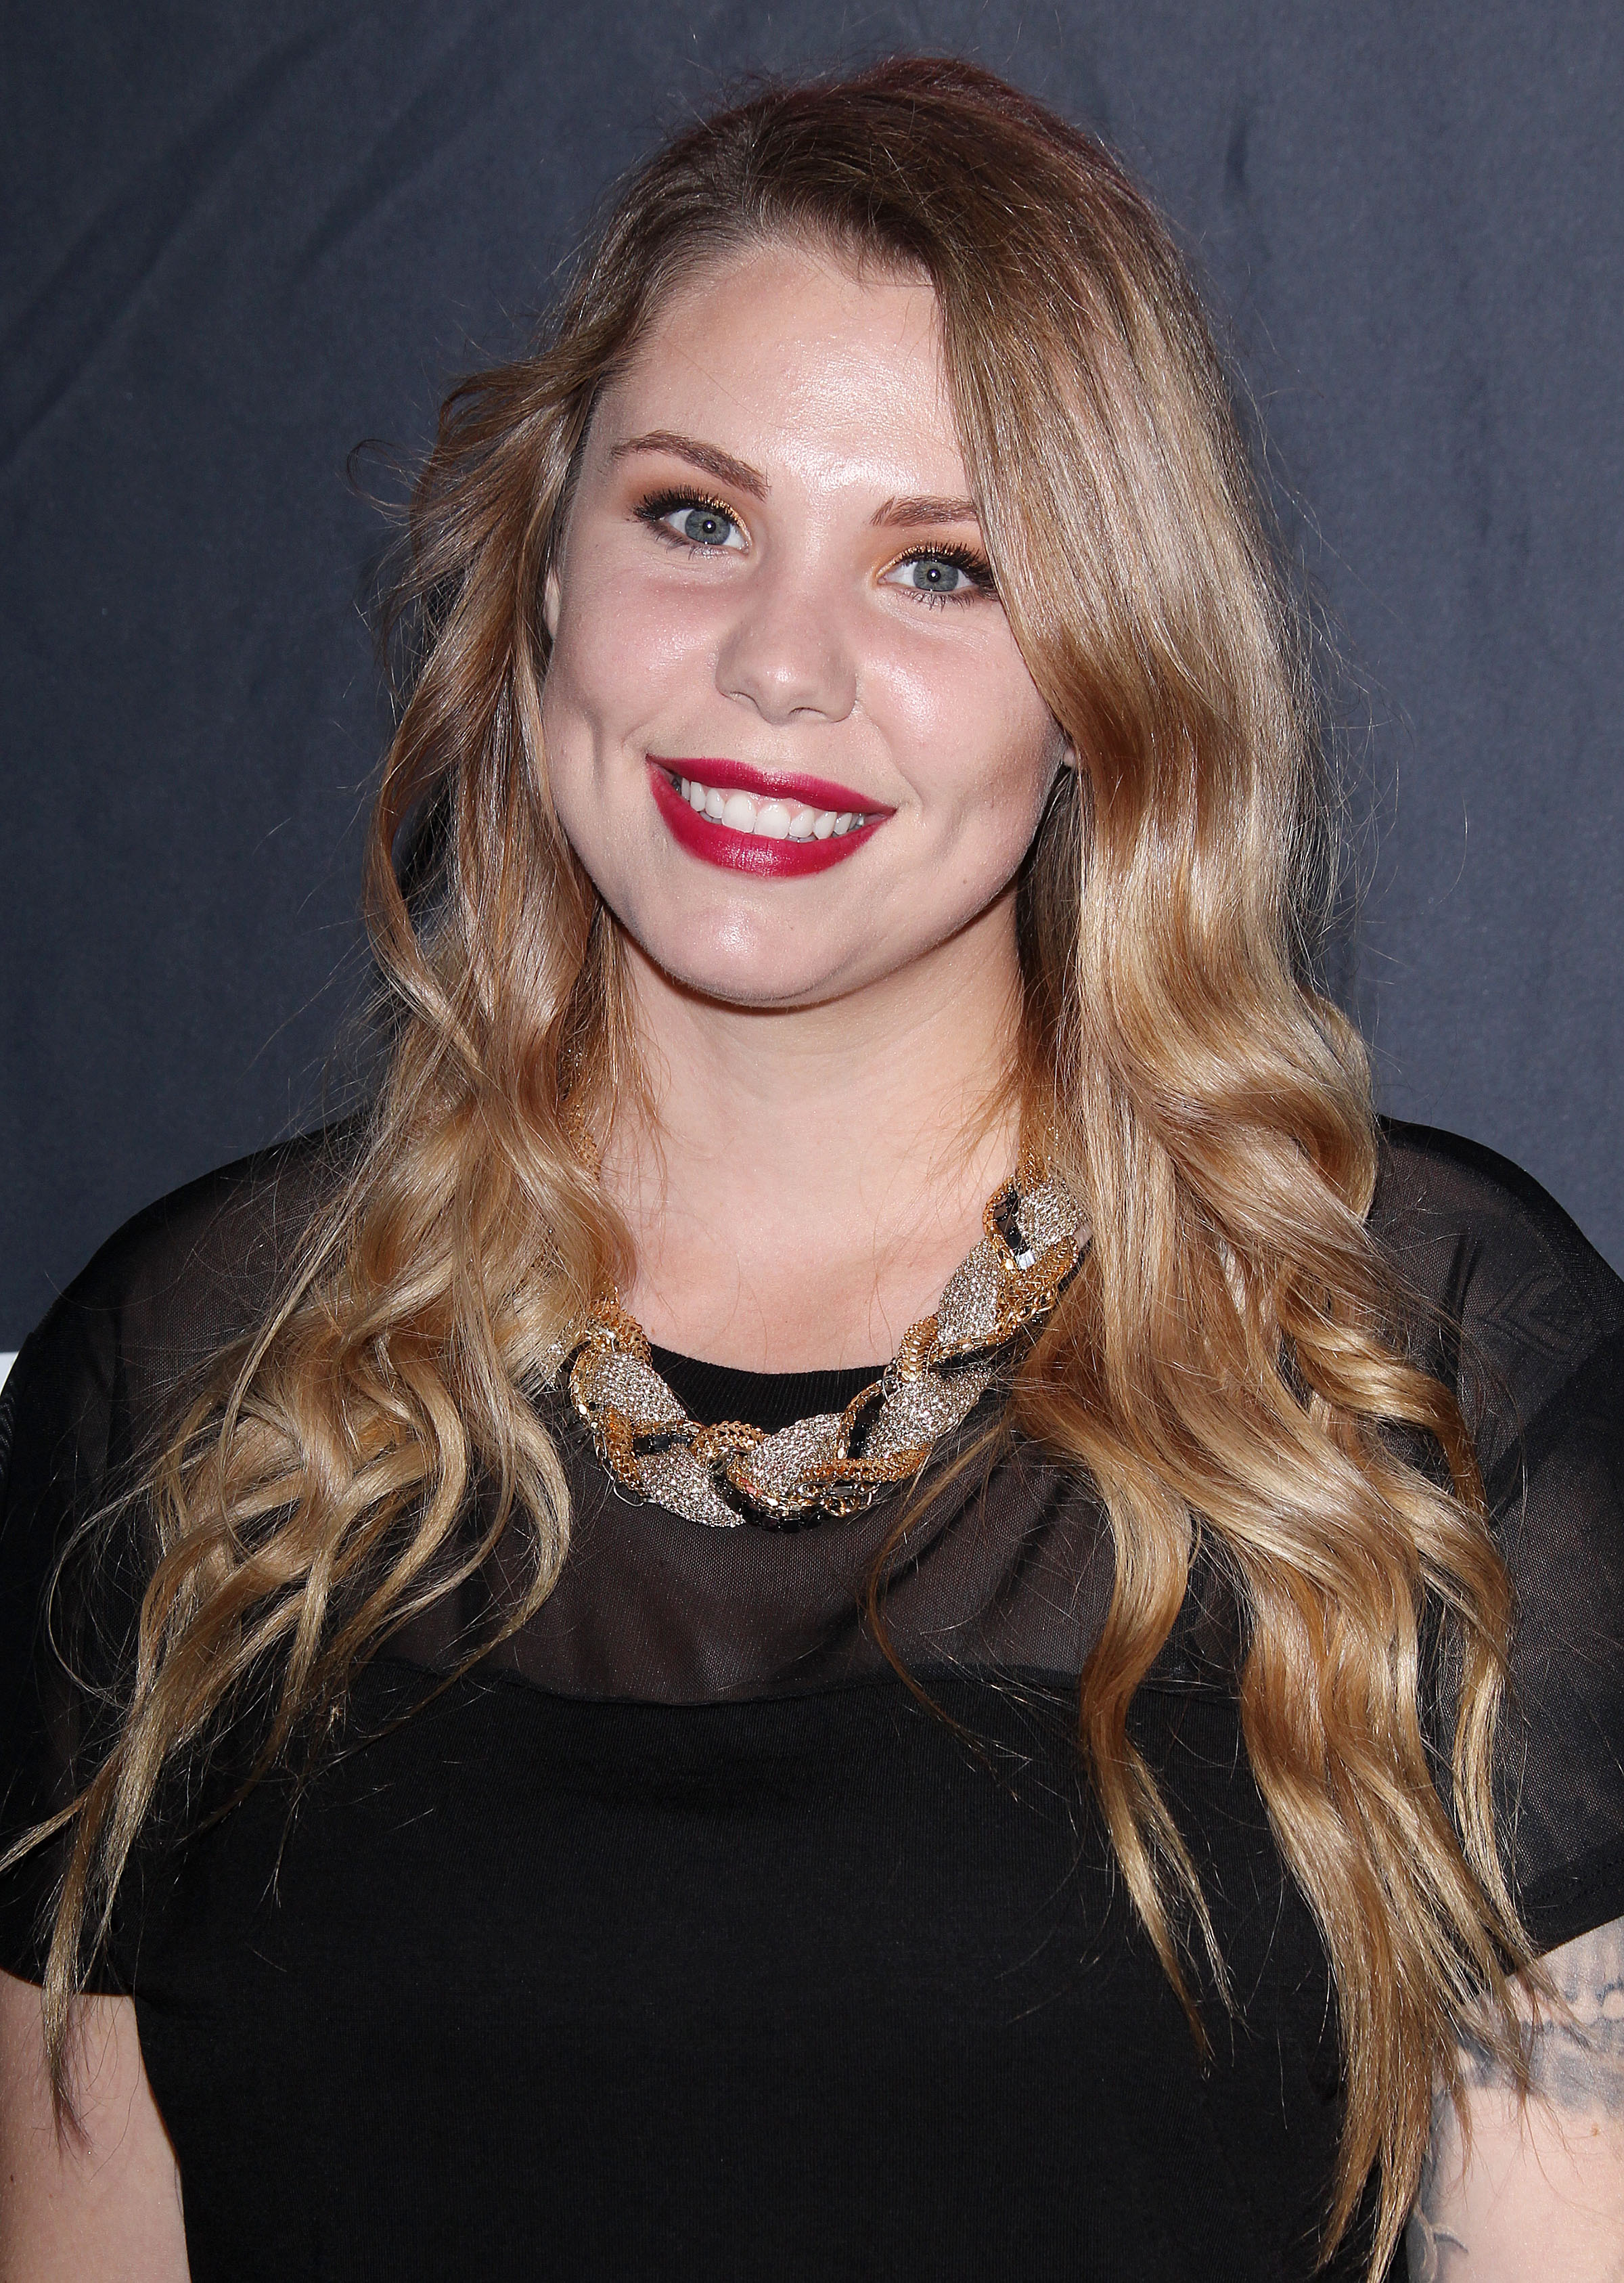 Kailyn Lowry Welcomes Third Child2400 x 3373